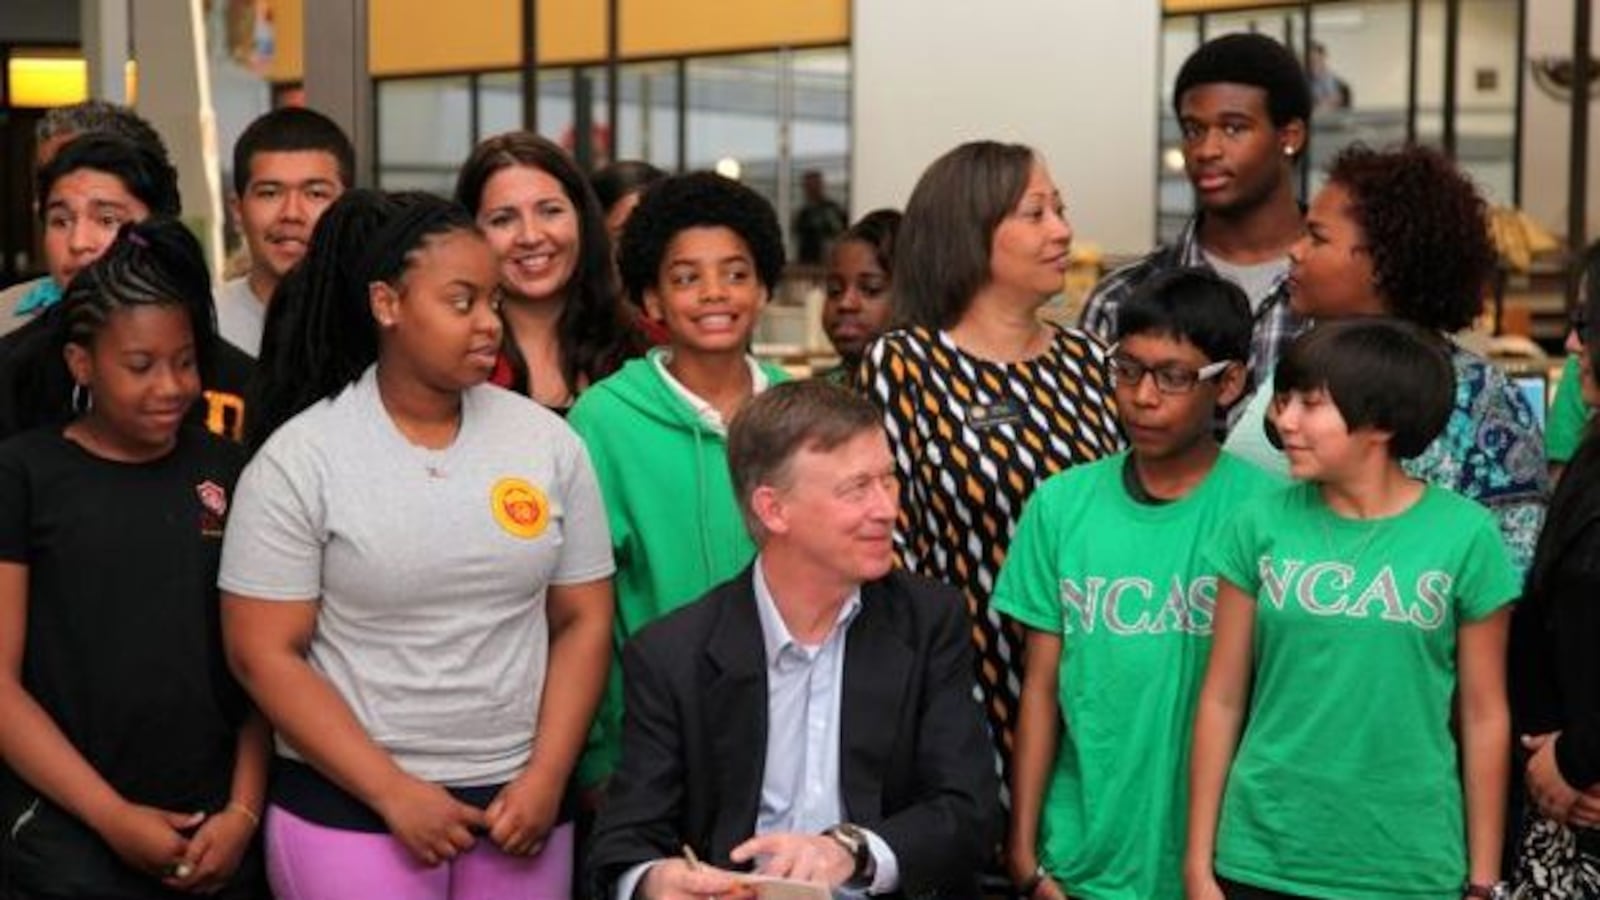 Gov. John Hickenlooper, surrounded by students from DCIS Montbello and NCAS - Noel Community Arts School, signs a bill changing Denver Public Schools' PERA contributions.